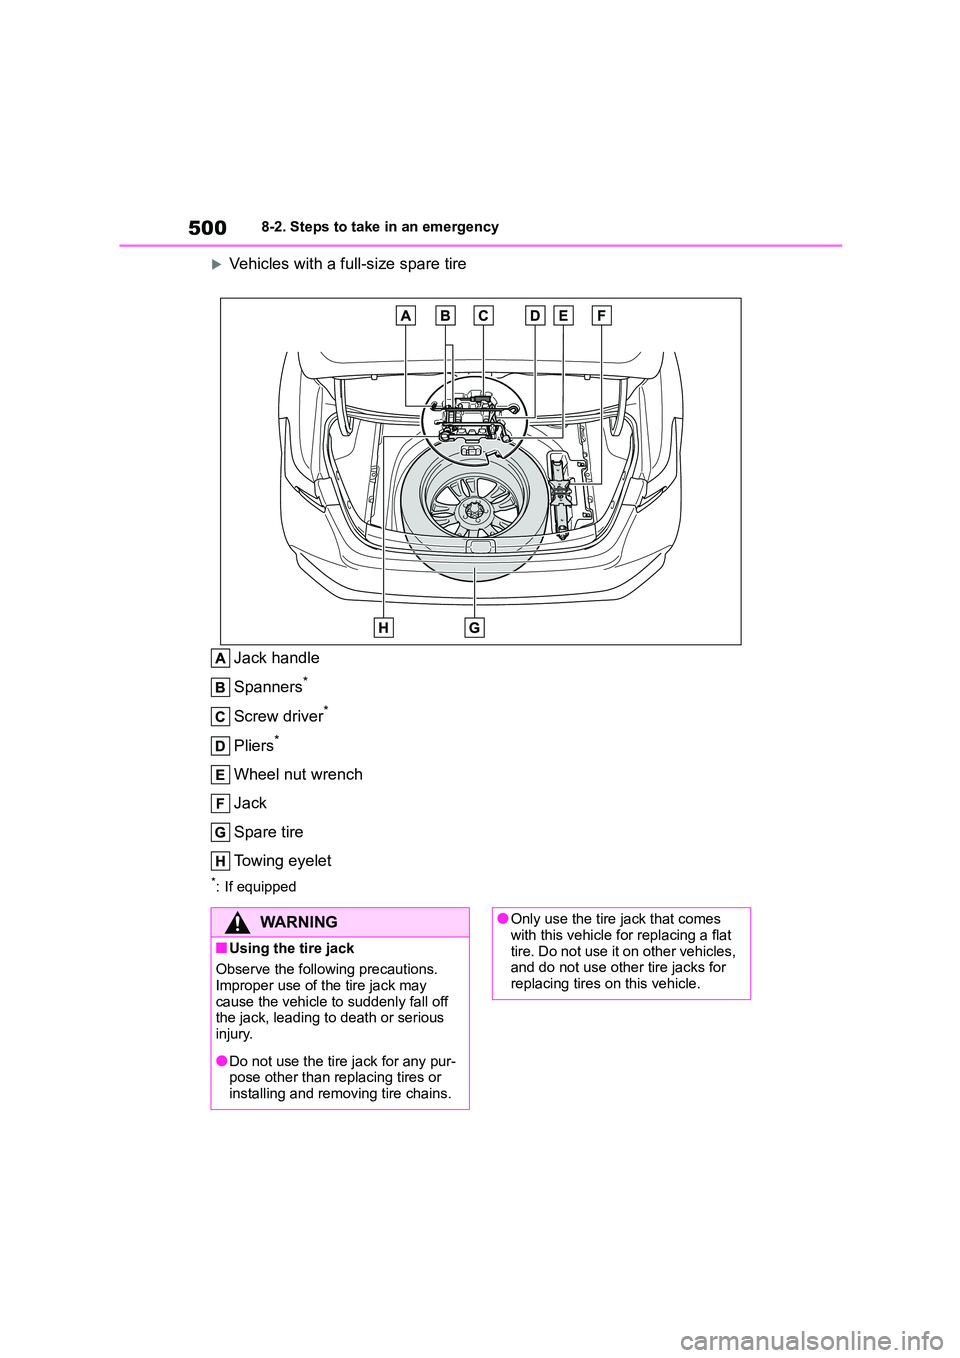 TOYOTA COROLLA 2022  Owners Manual (in English) 5008-2. Steps to take in an emergency
Vehicles with a full-size spare tire 
Jack handle 
Spanners*
Screw driver*
Pliers*
Wheel nut wrench 
Jack
Spare tire 
Towing eyelet
*: If equipped
WA R N I N G